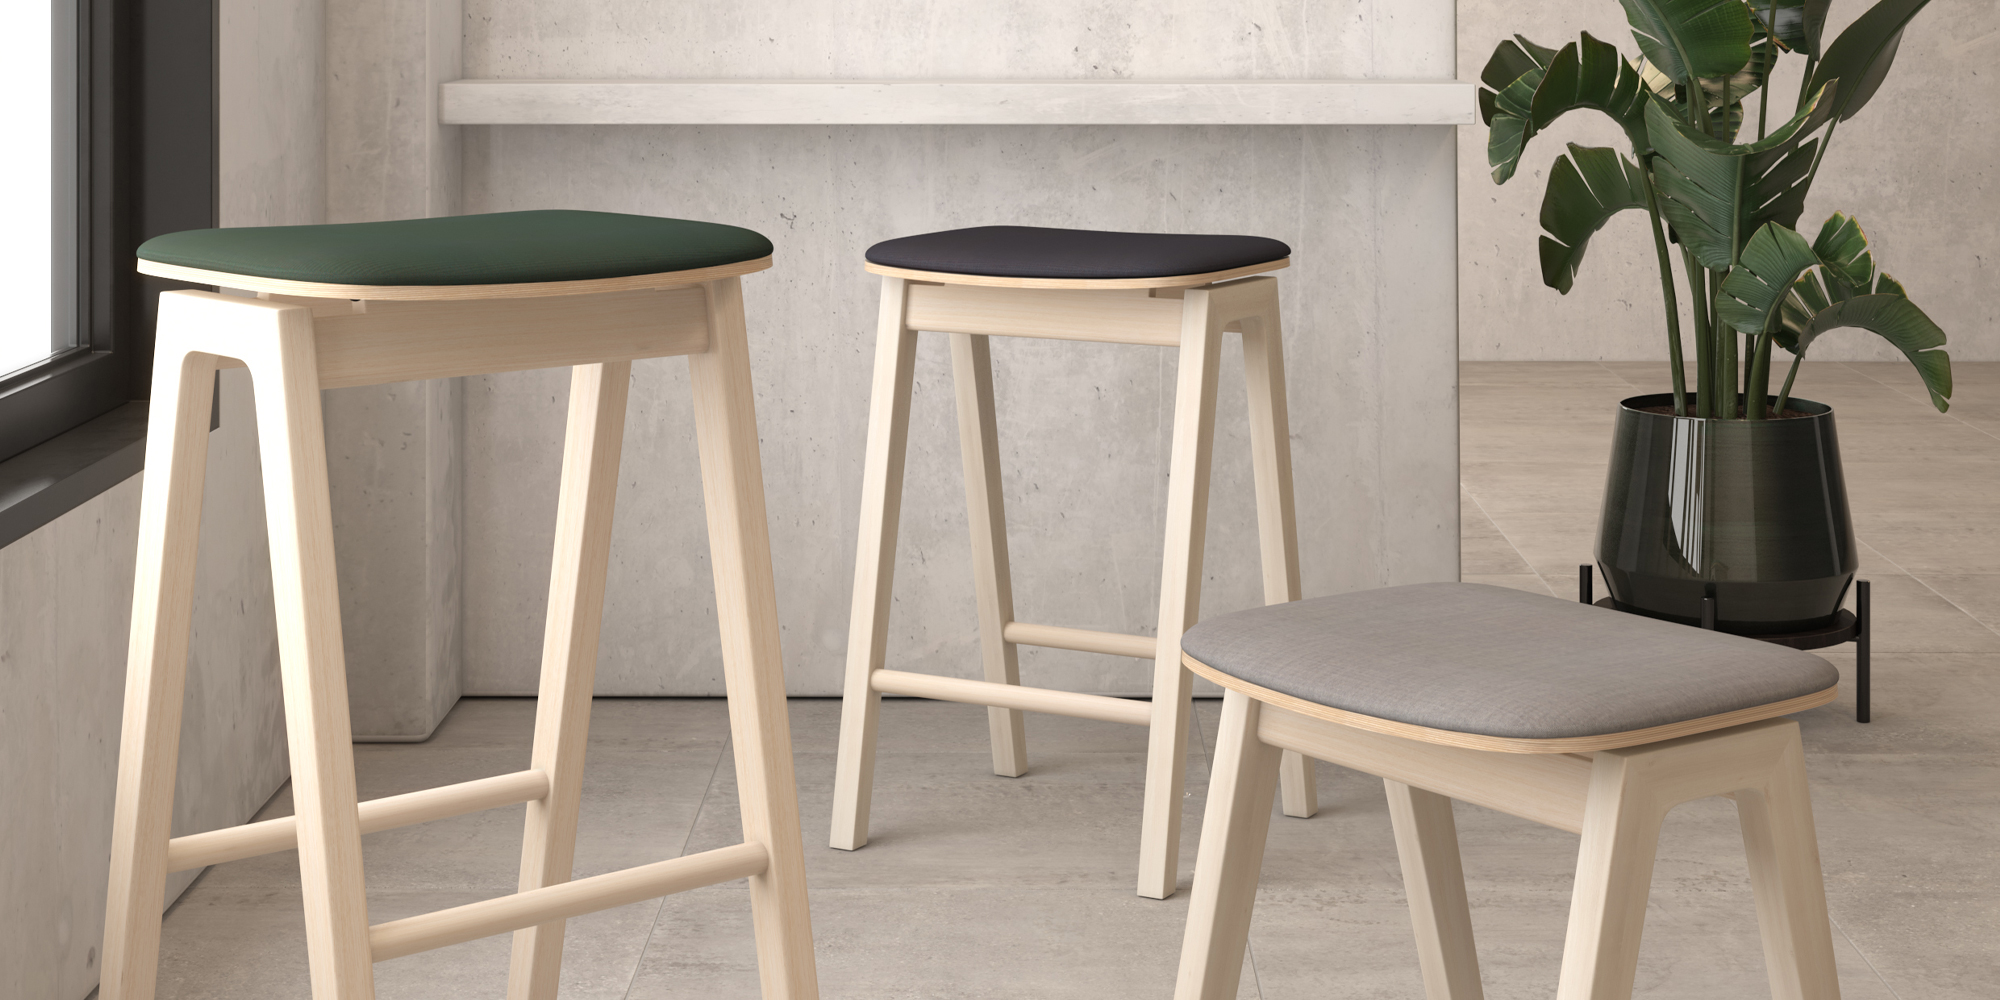 Ritz Stool Feature Image